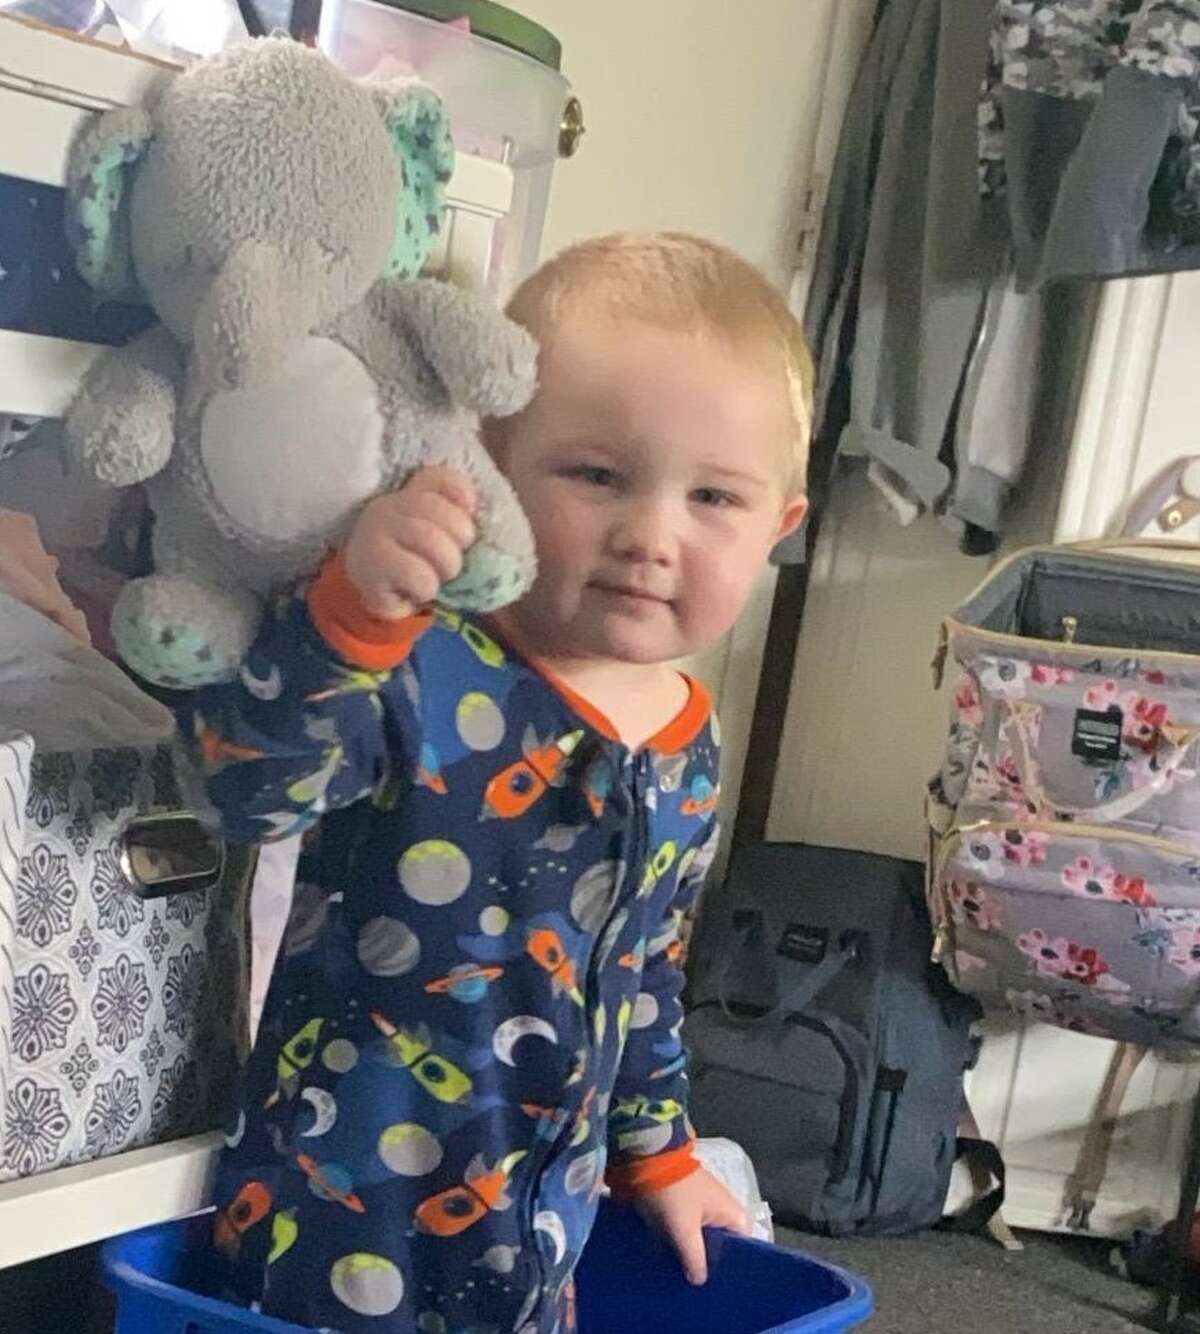 Kent County deputies started looking for the almost 2-year-old on Sunday in the area of Division and M-6 after the family reported the boy missing around 11 a.m.